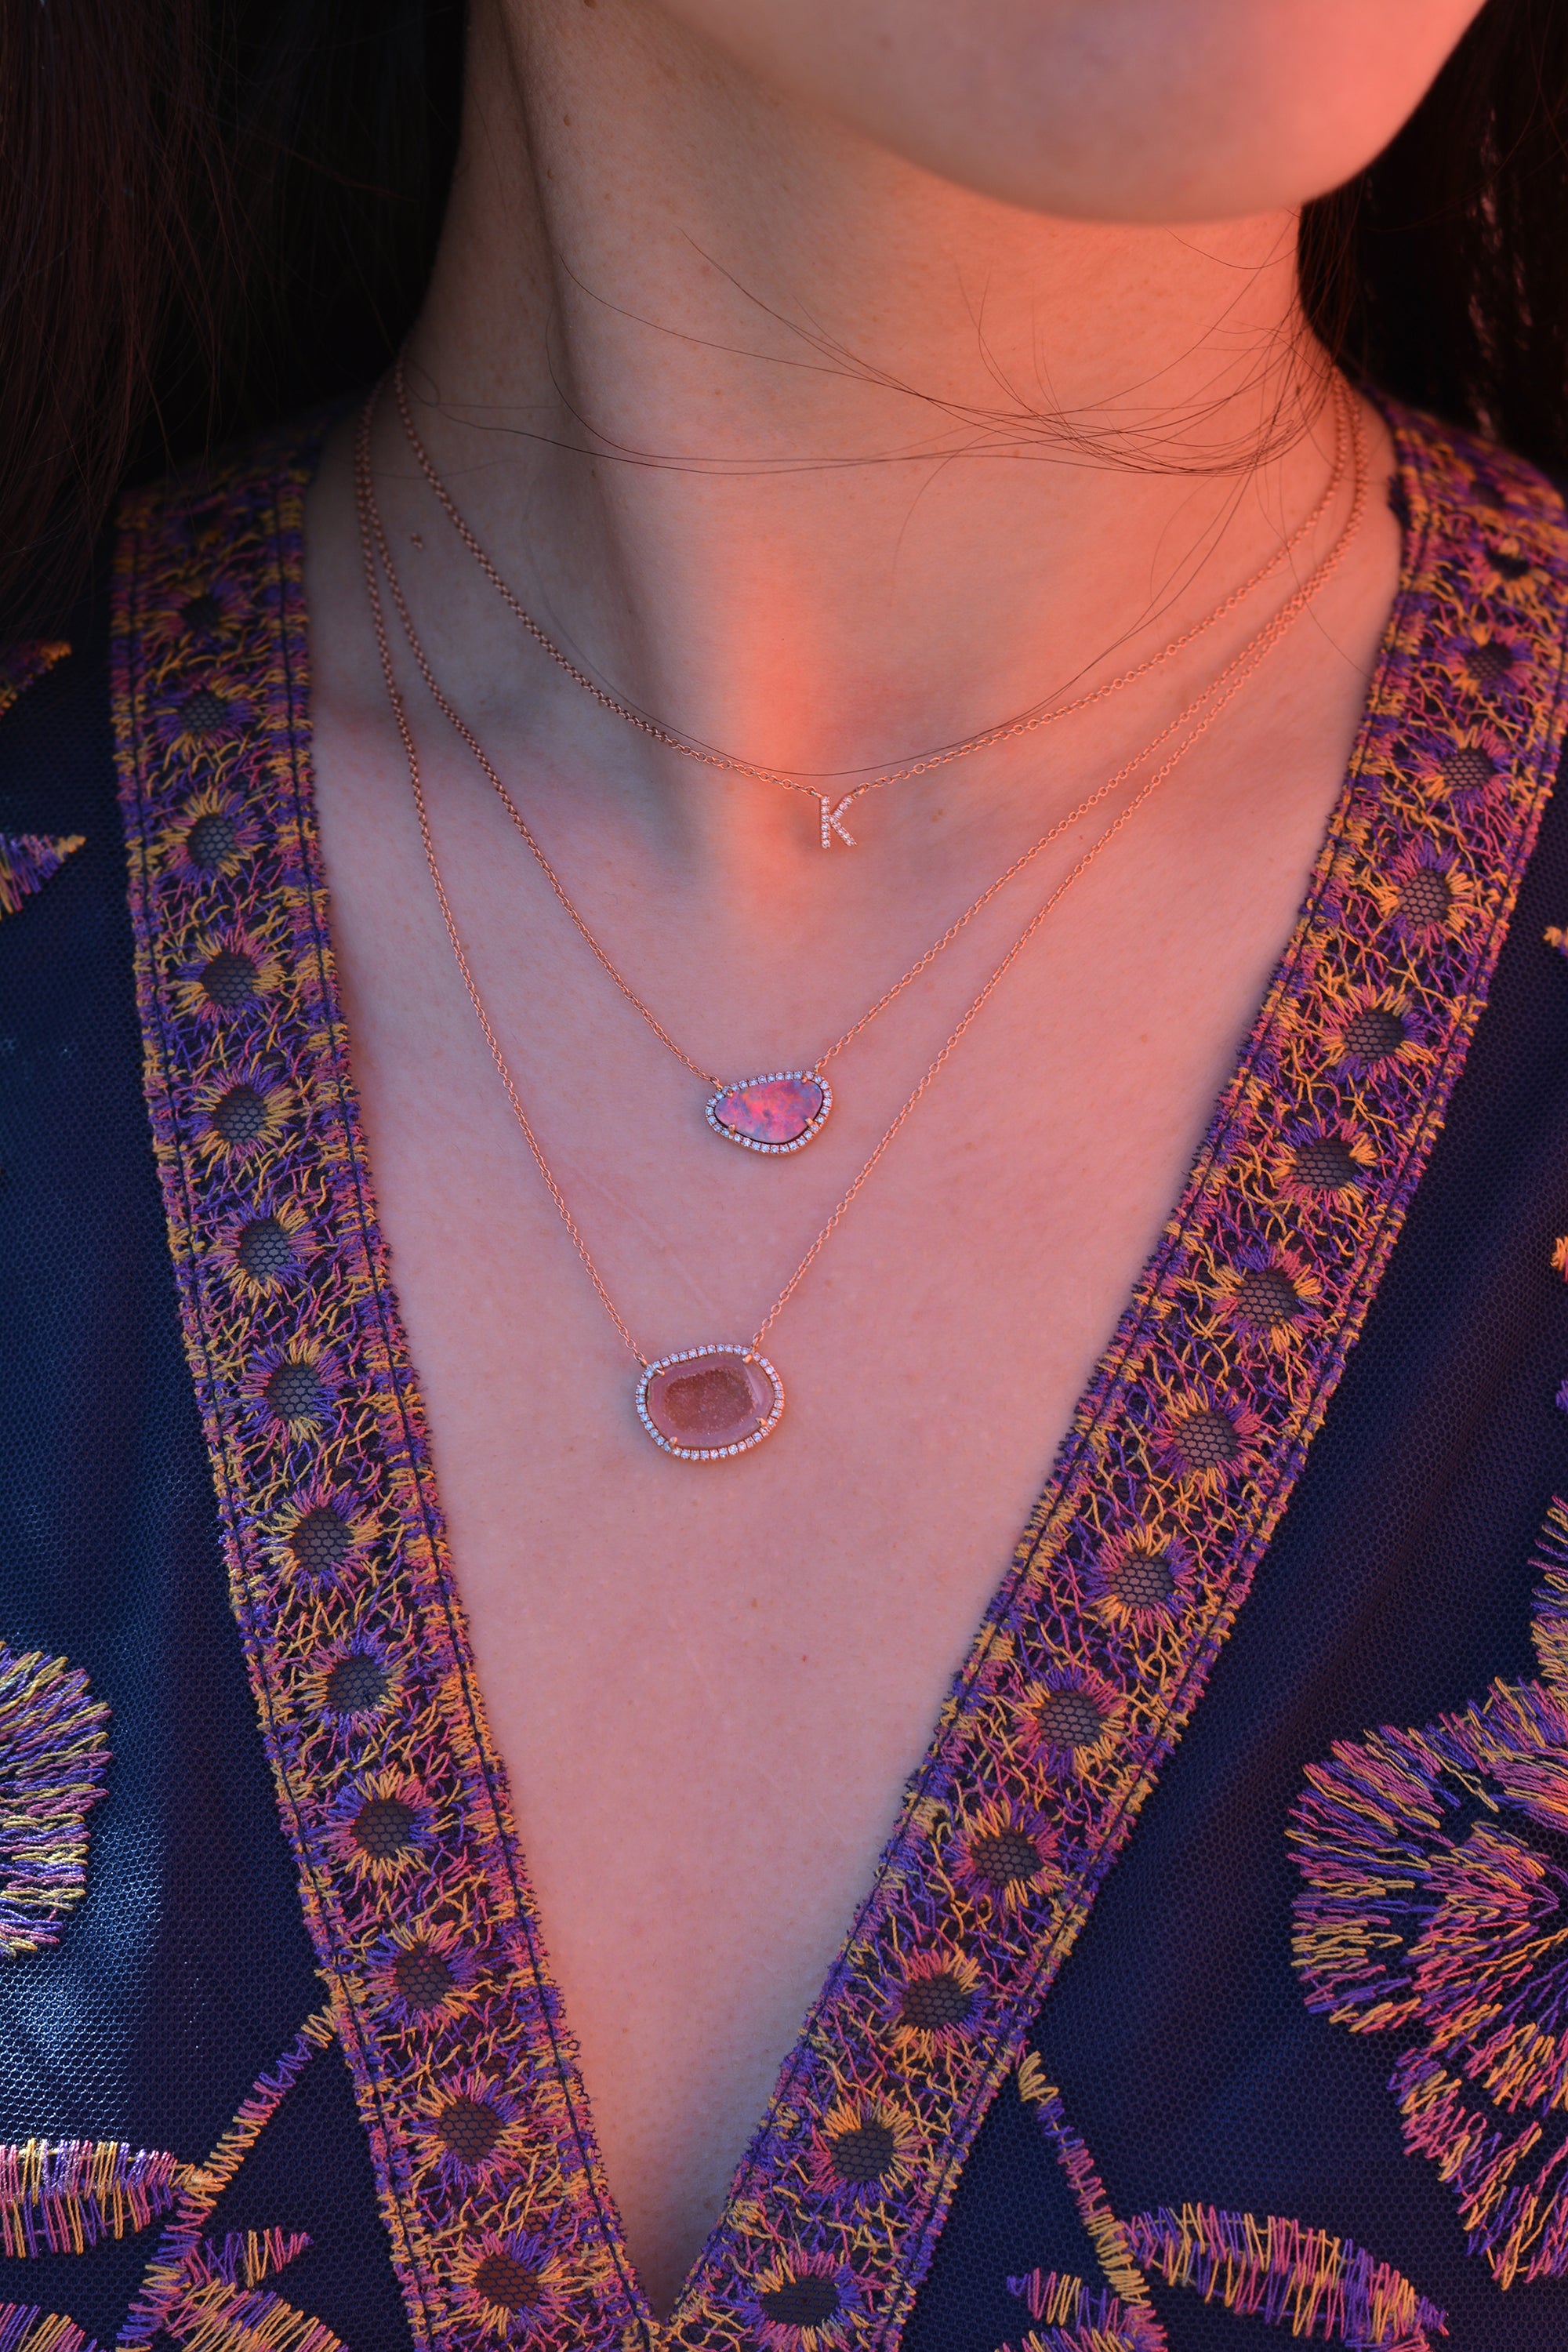 Pink Baby Geode Necklace With Diamonds in 14k Rose Gold